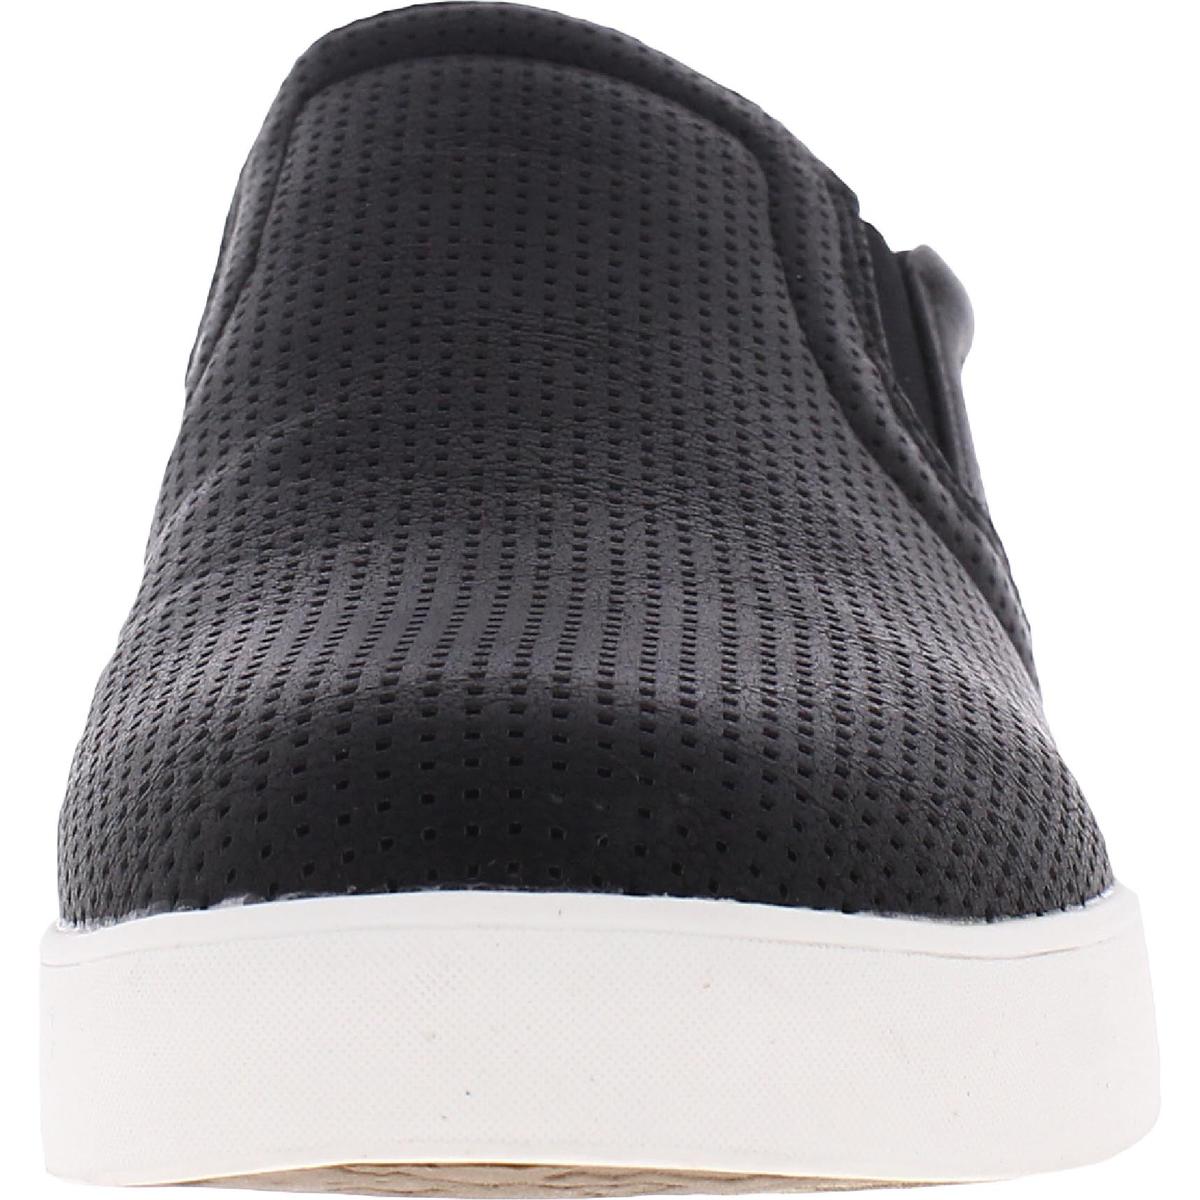 Dr. Scholl's Madison Womens Lifestyle Slip-On Sneakers